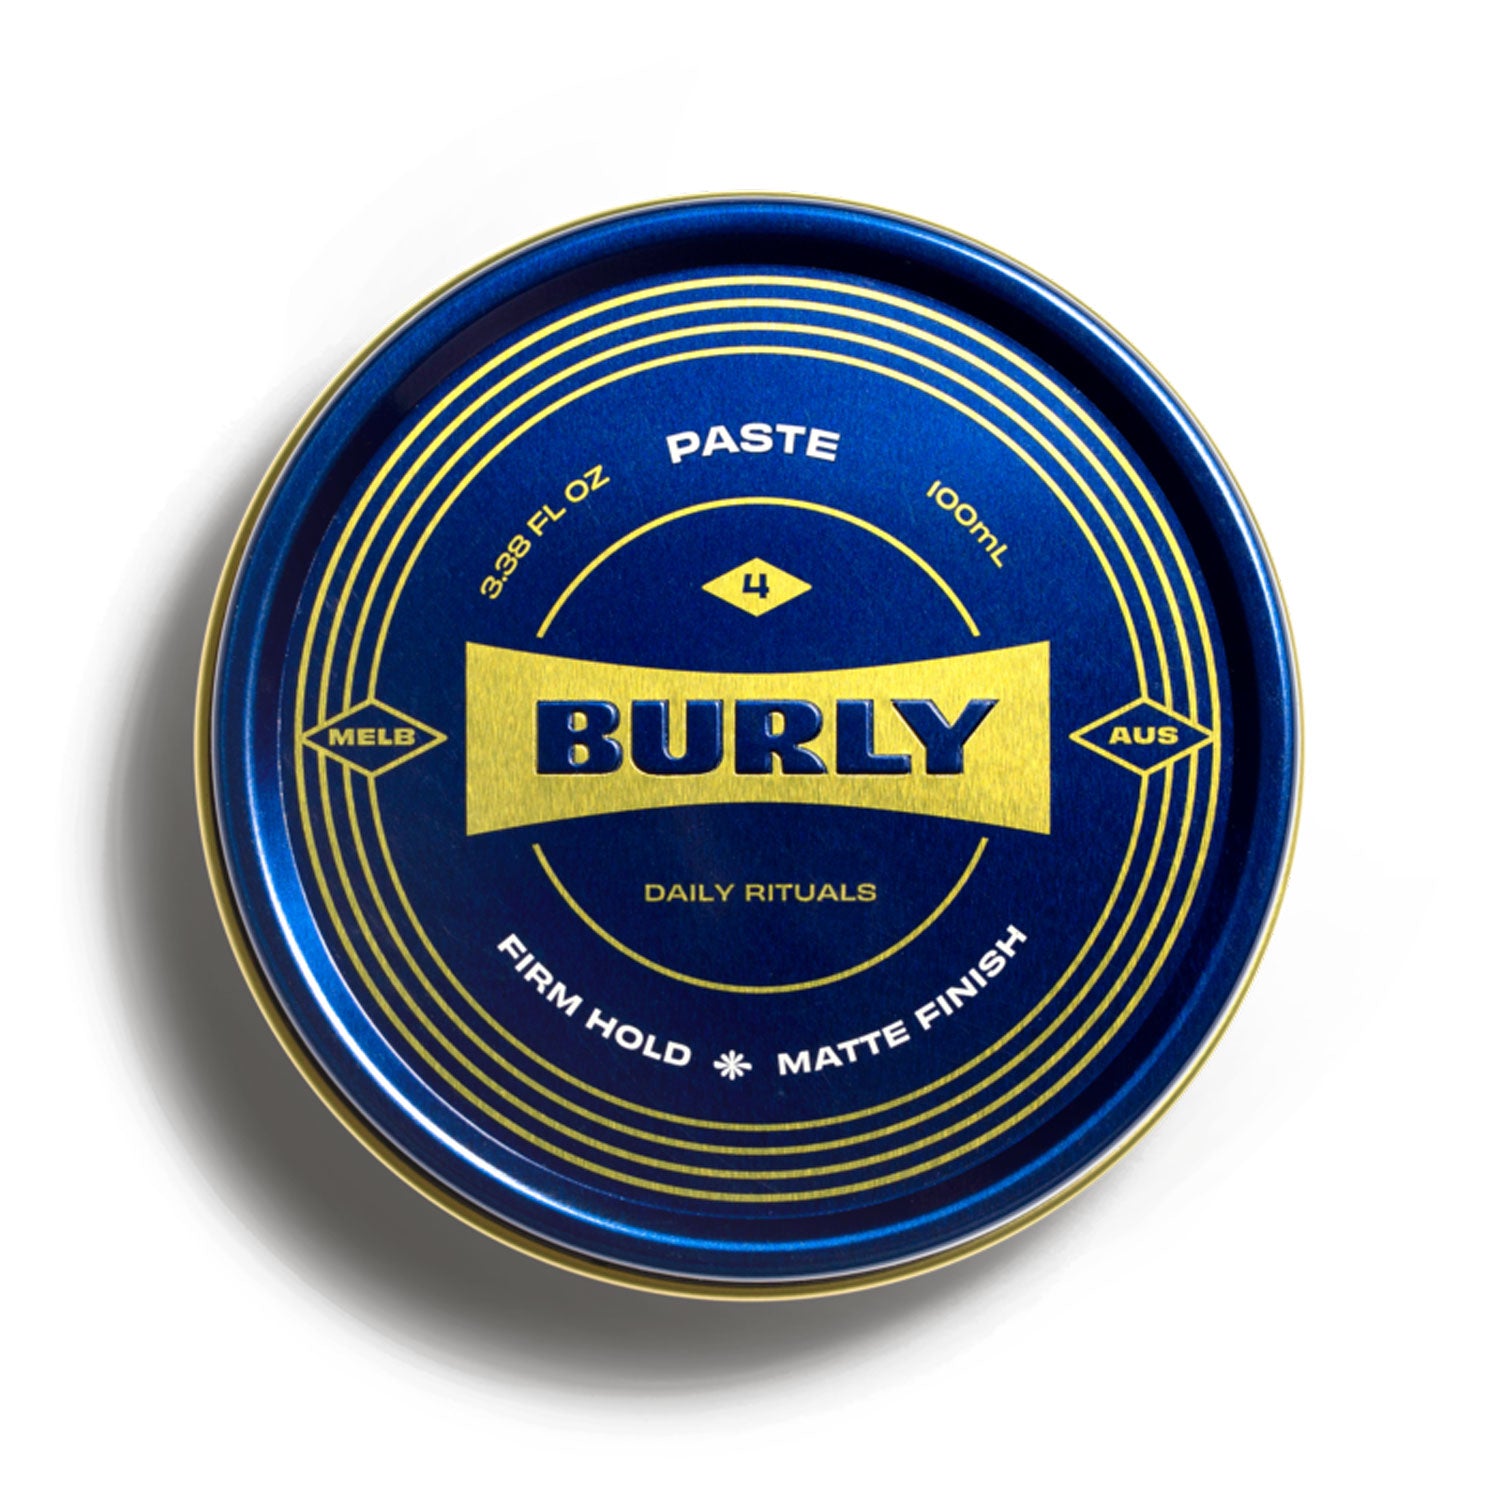 Burly #4 Paste 100ml | Firm Hold & Matte Finish - Orcadia